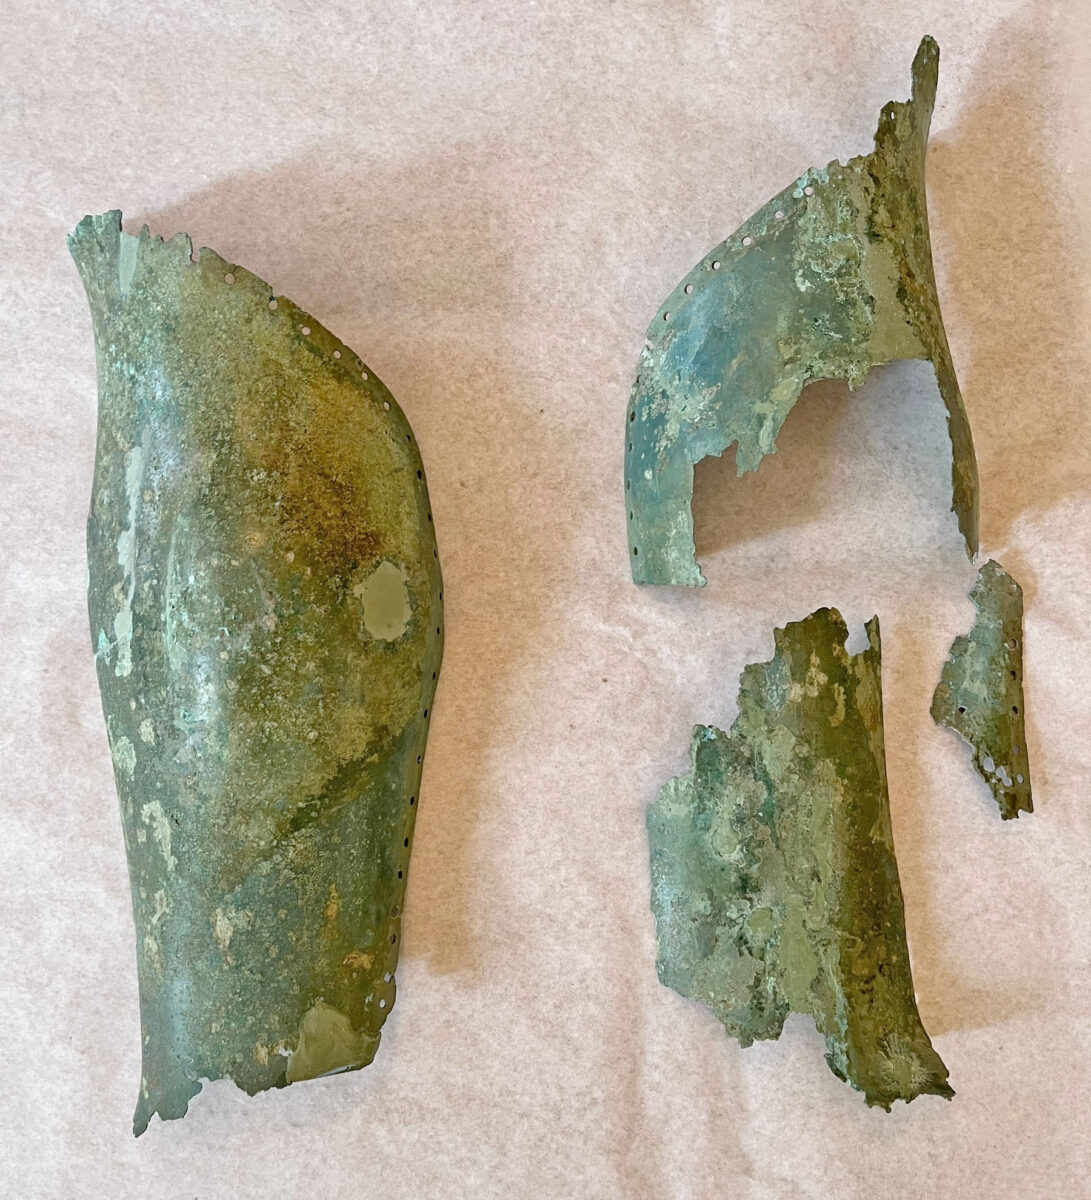 Pair of bronze greaves with holes lining the upper edges to secure the coating. Dated to the Classical period. Image credit: Ministry of Culture and Sports.